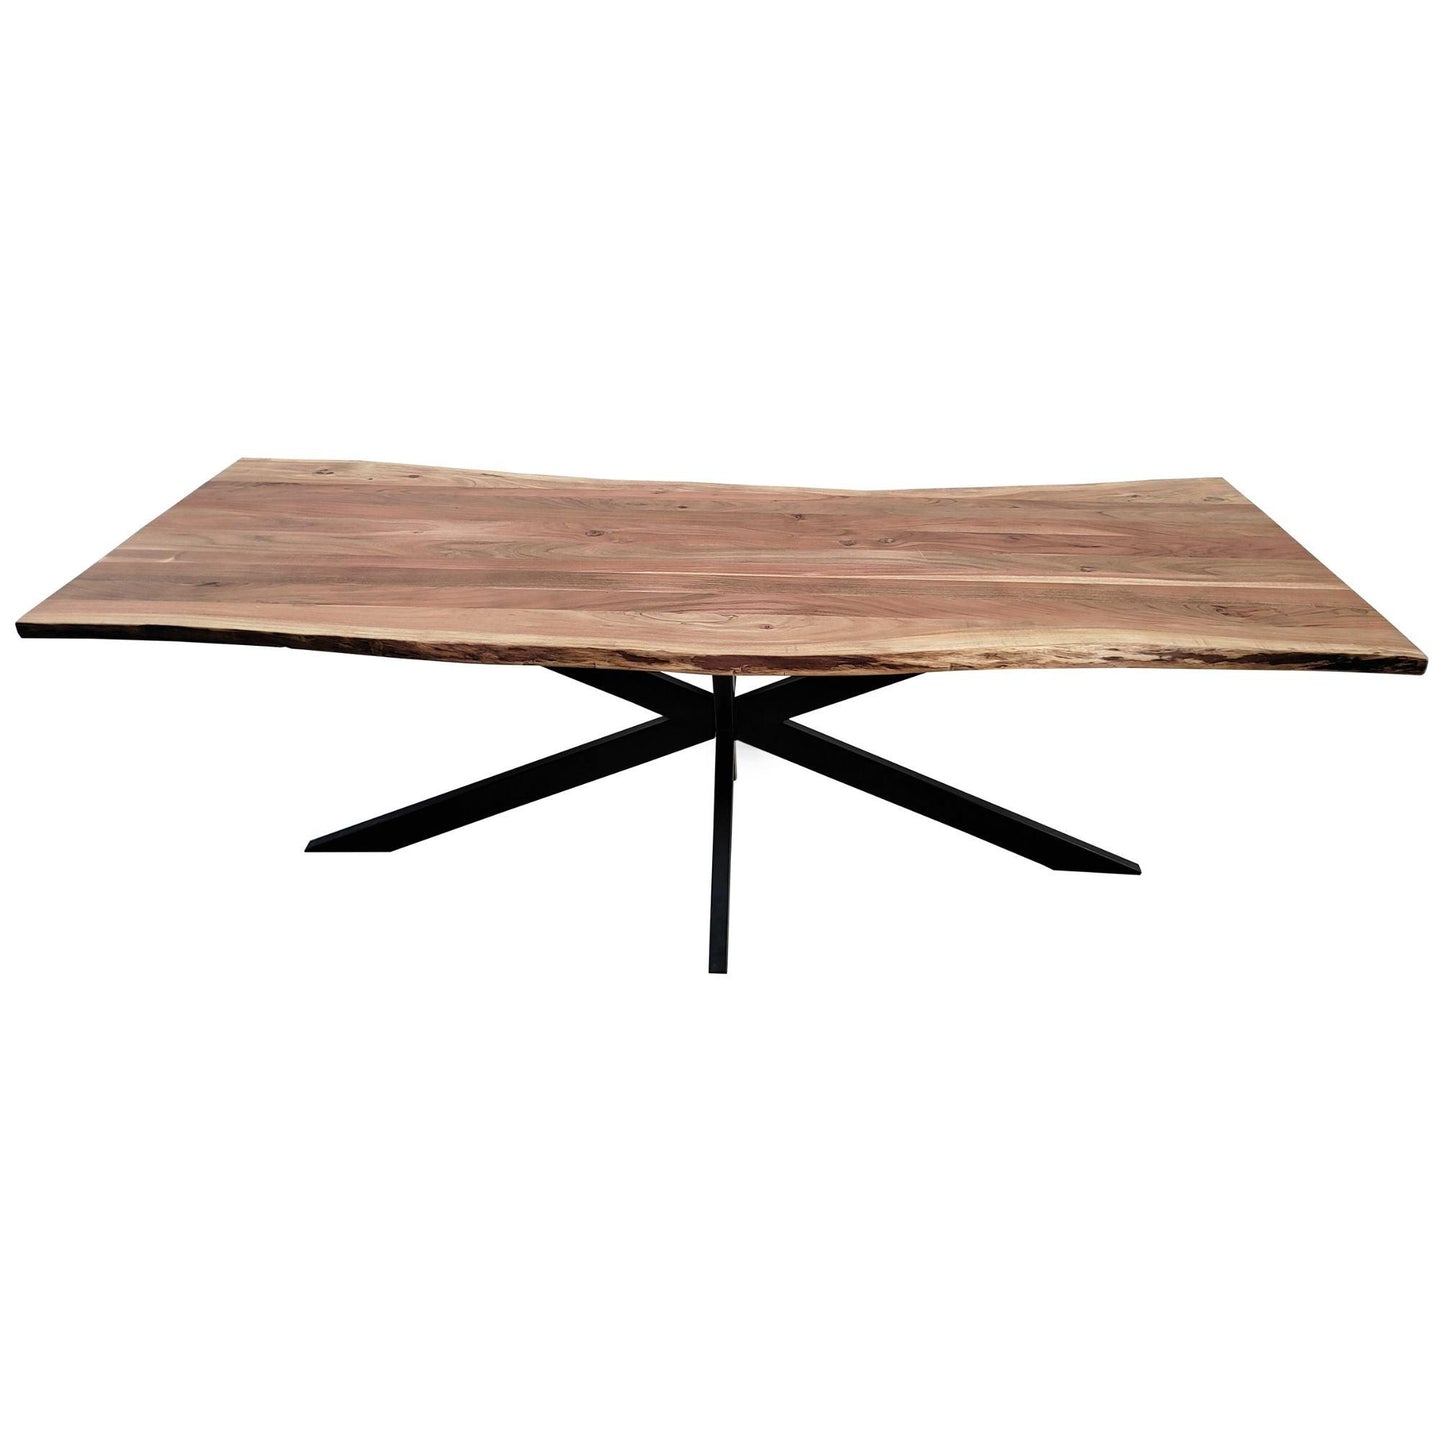 Buy Lantana Dining Table 240cm Live Edge Solid Acacia Timber Wood Metal Leg -Natural discounted | Products On Sale Australia